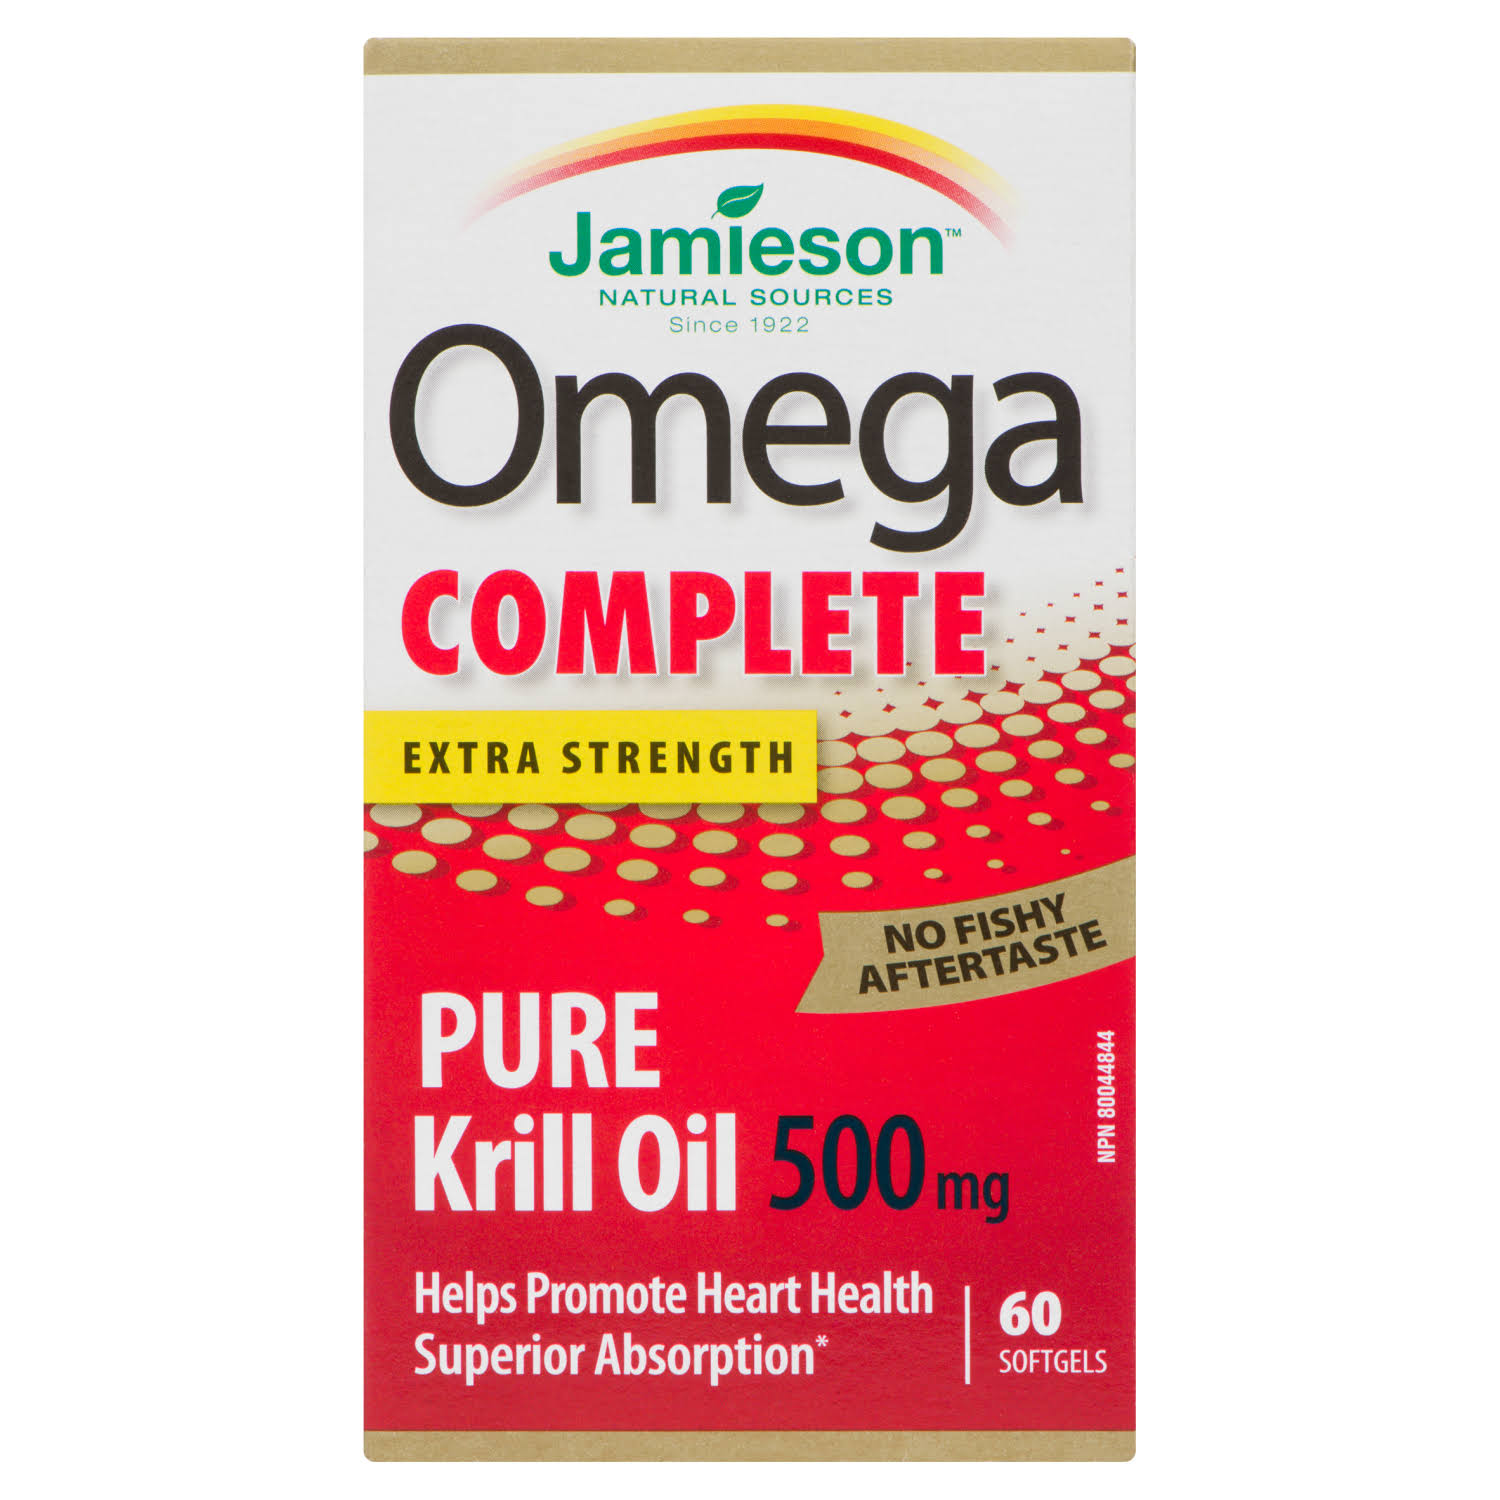 Jamieson Omega Complete Pure Krill Oil Extra Strength, 60 Softgels